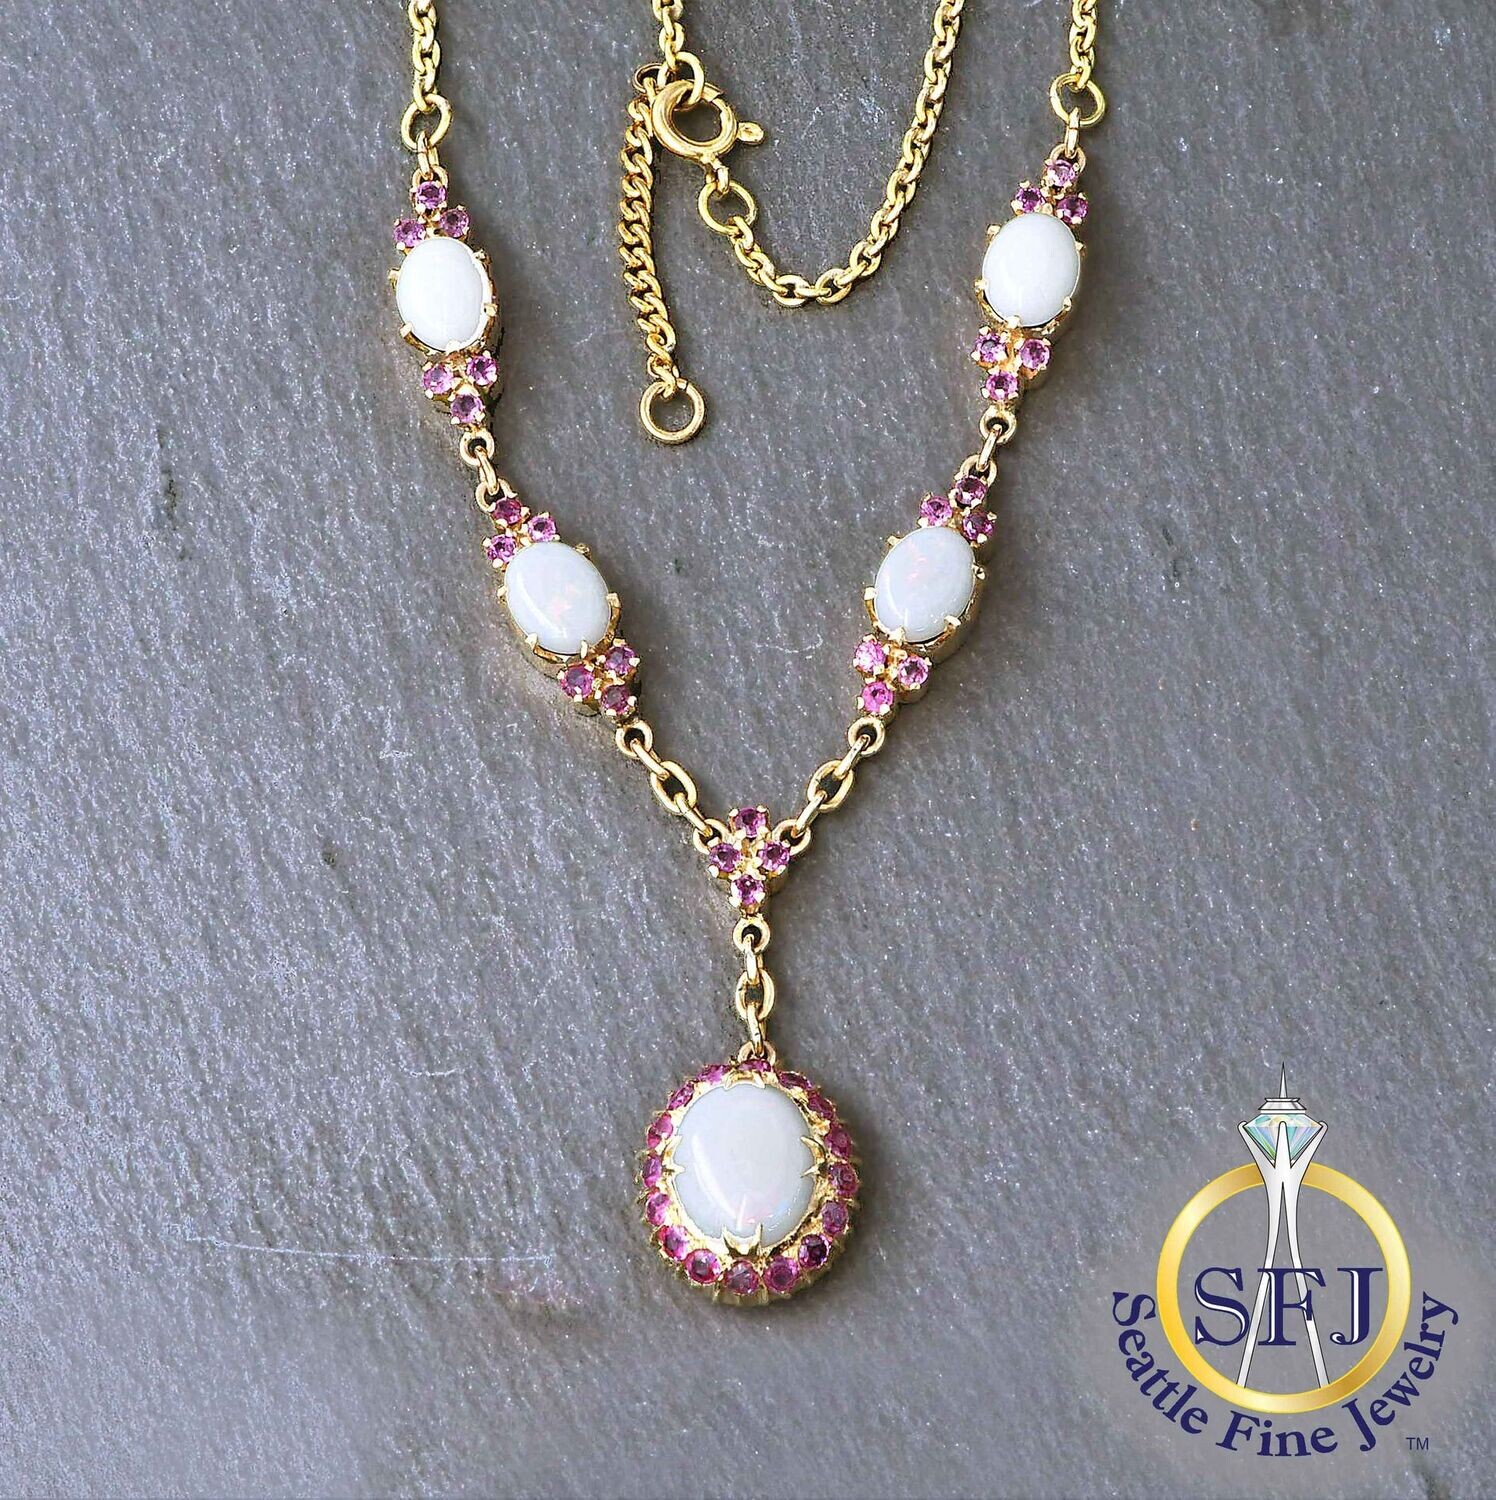 White Opal and Ruby Necklace, Solid 14k Yellow Gold